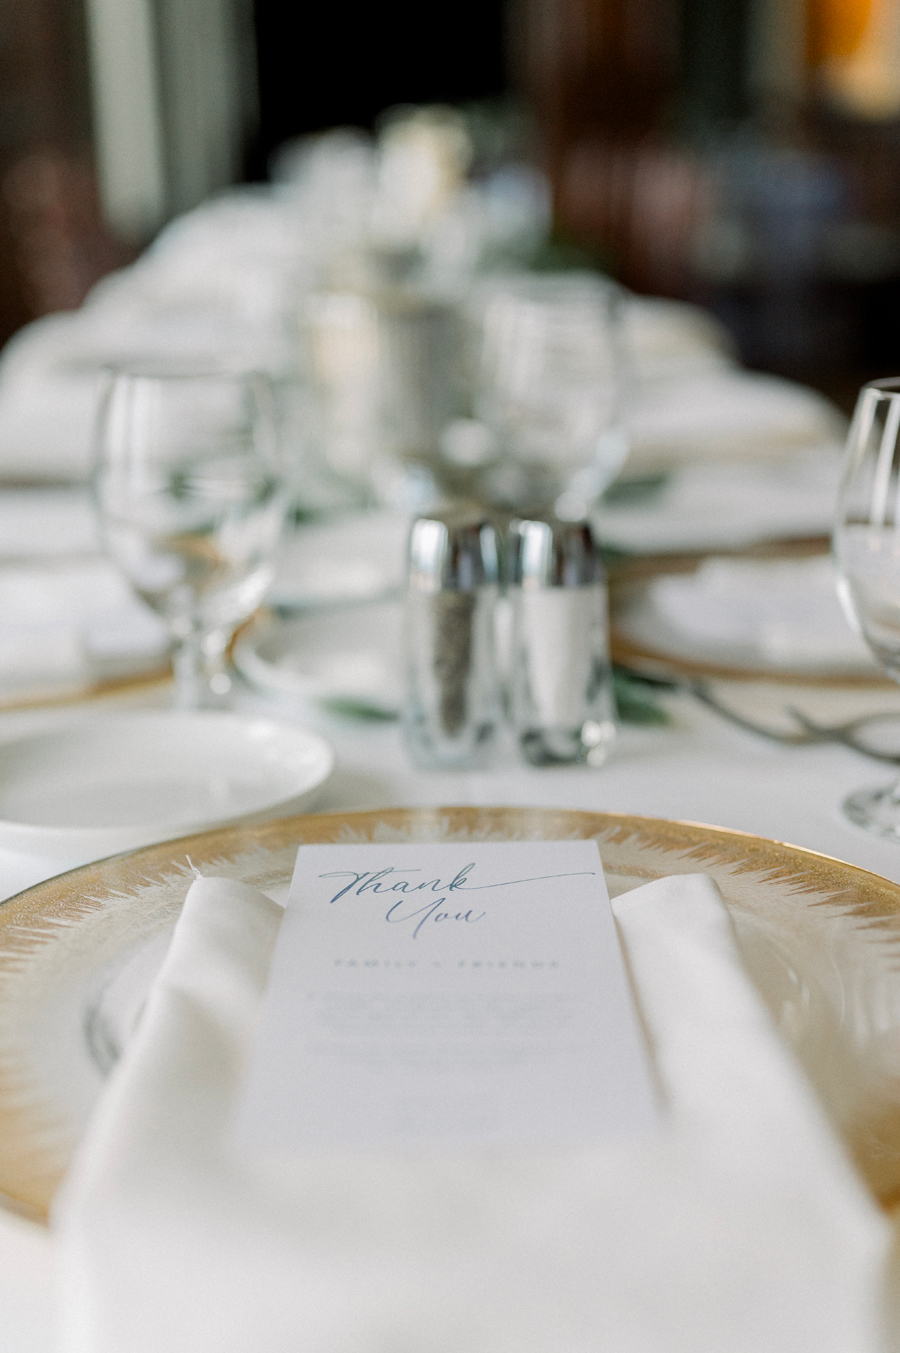 Reception details at the Club at Old Hawthorne for a Westminster College wedding by Love Tree Studios.